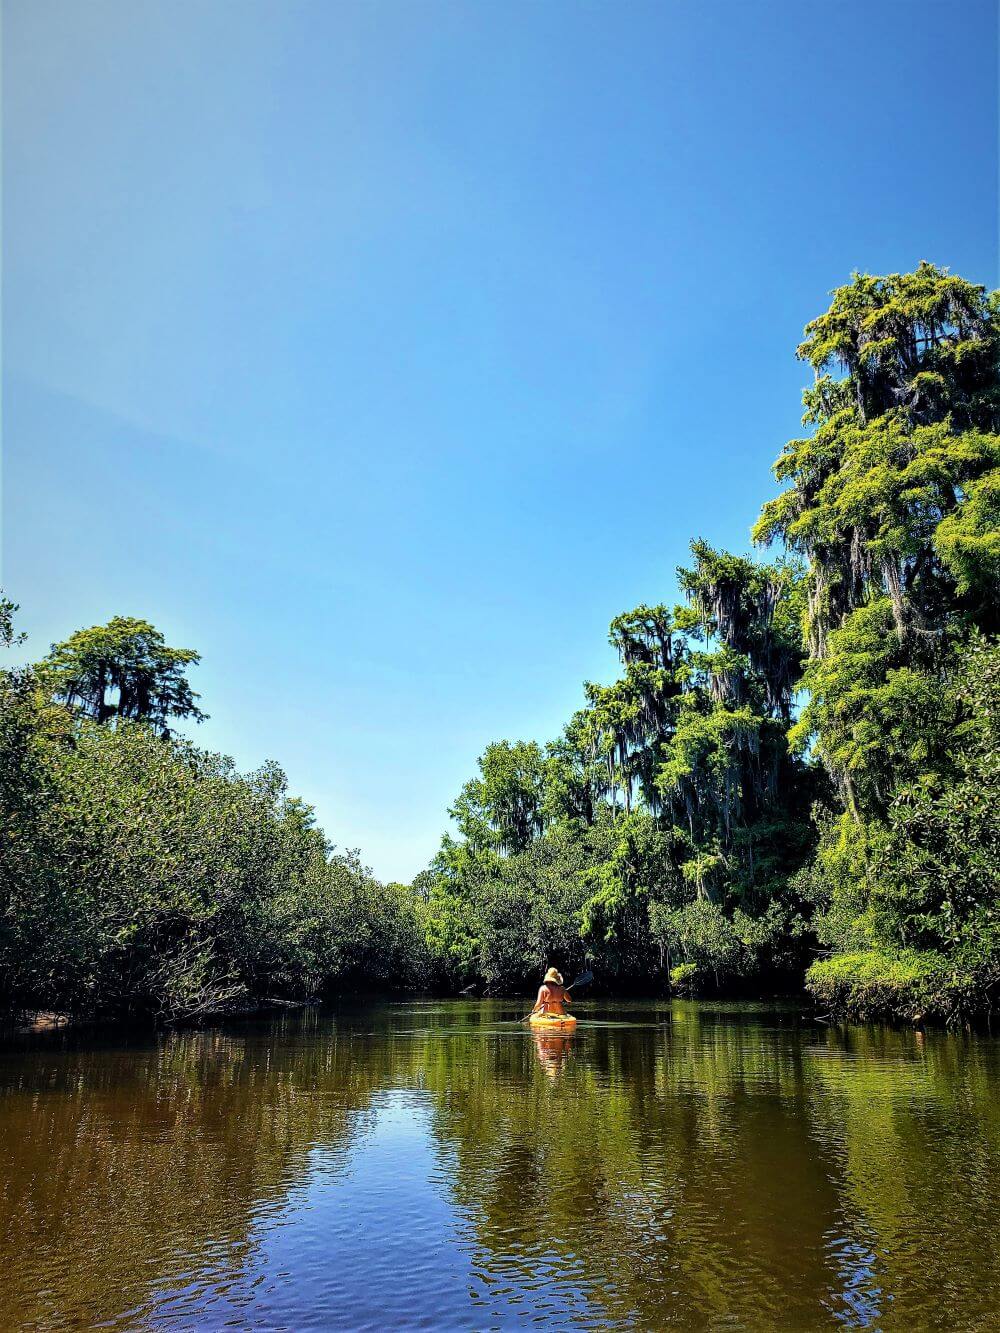 alt text = "a distance ahead a kayaker at jonathan dickinson state park on the loxahatchee river"